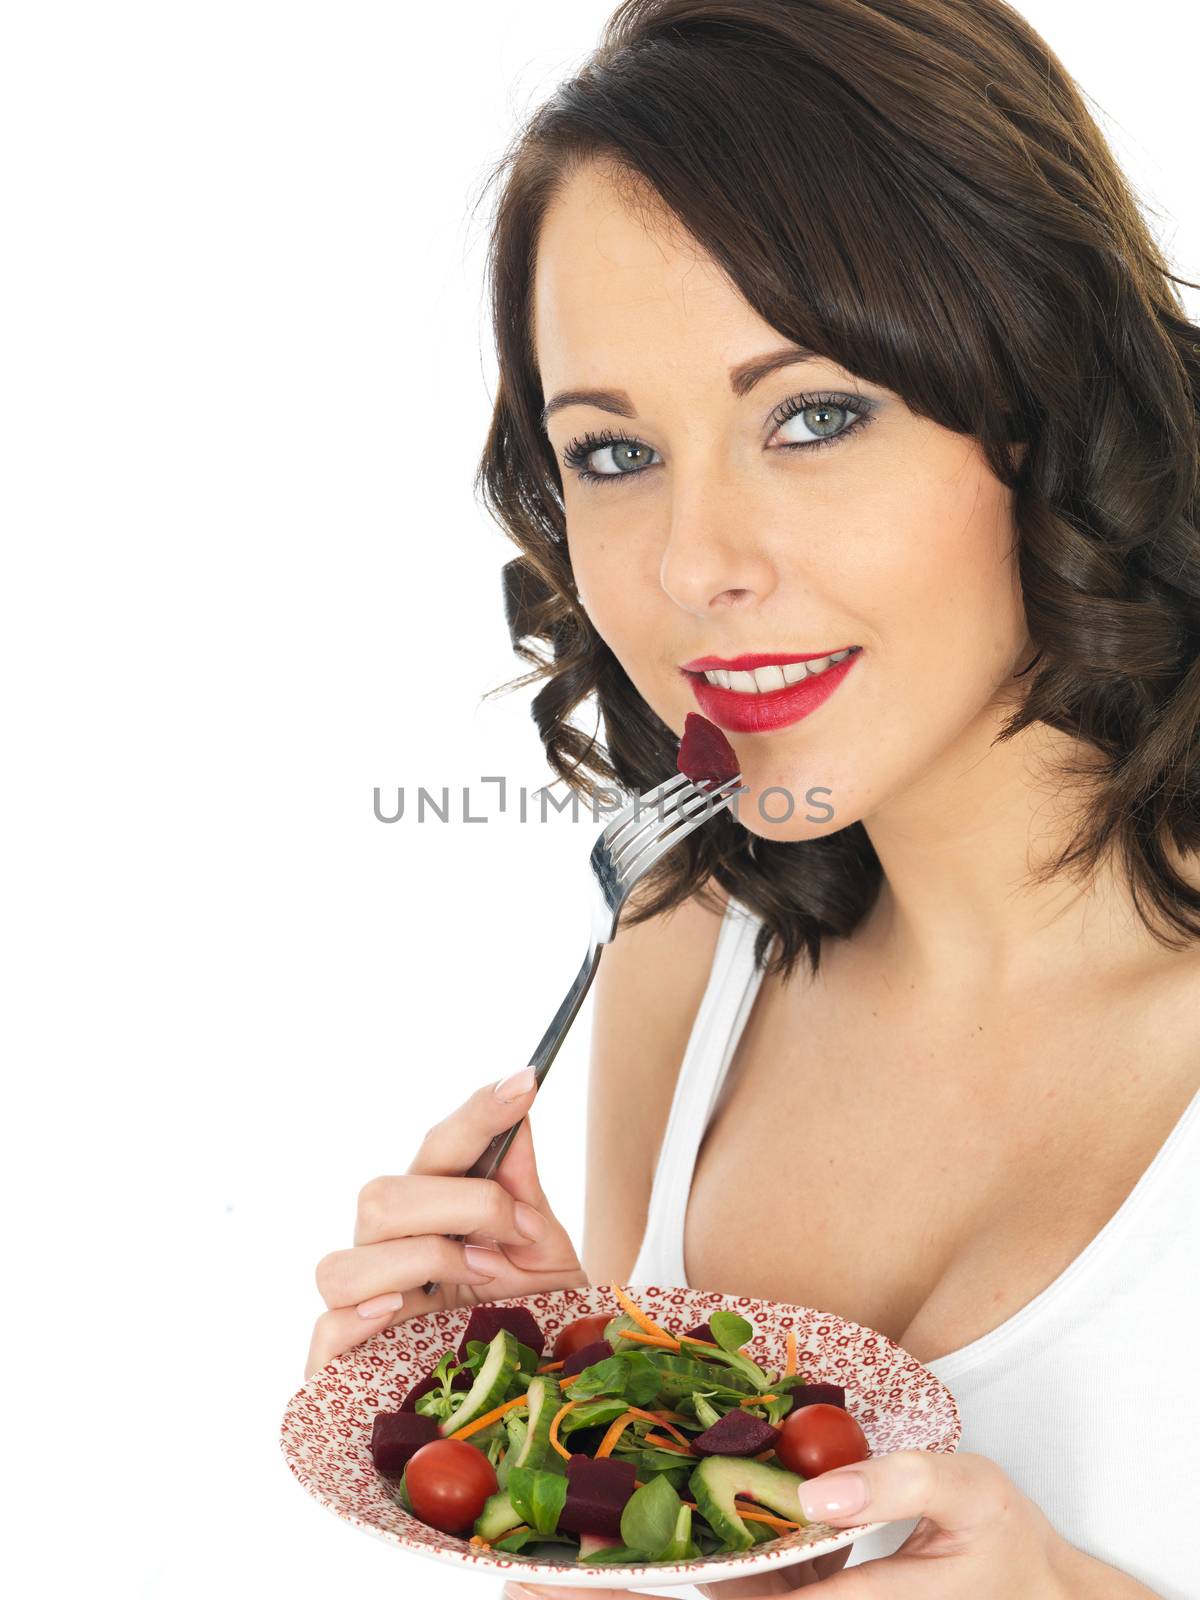 Young Woman Eating Salad by Whiteboxmedia